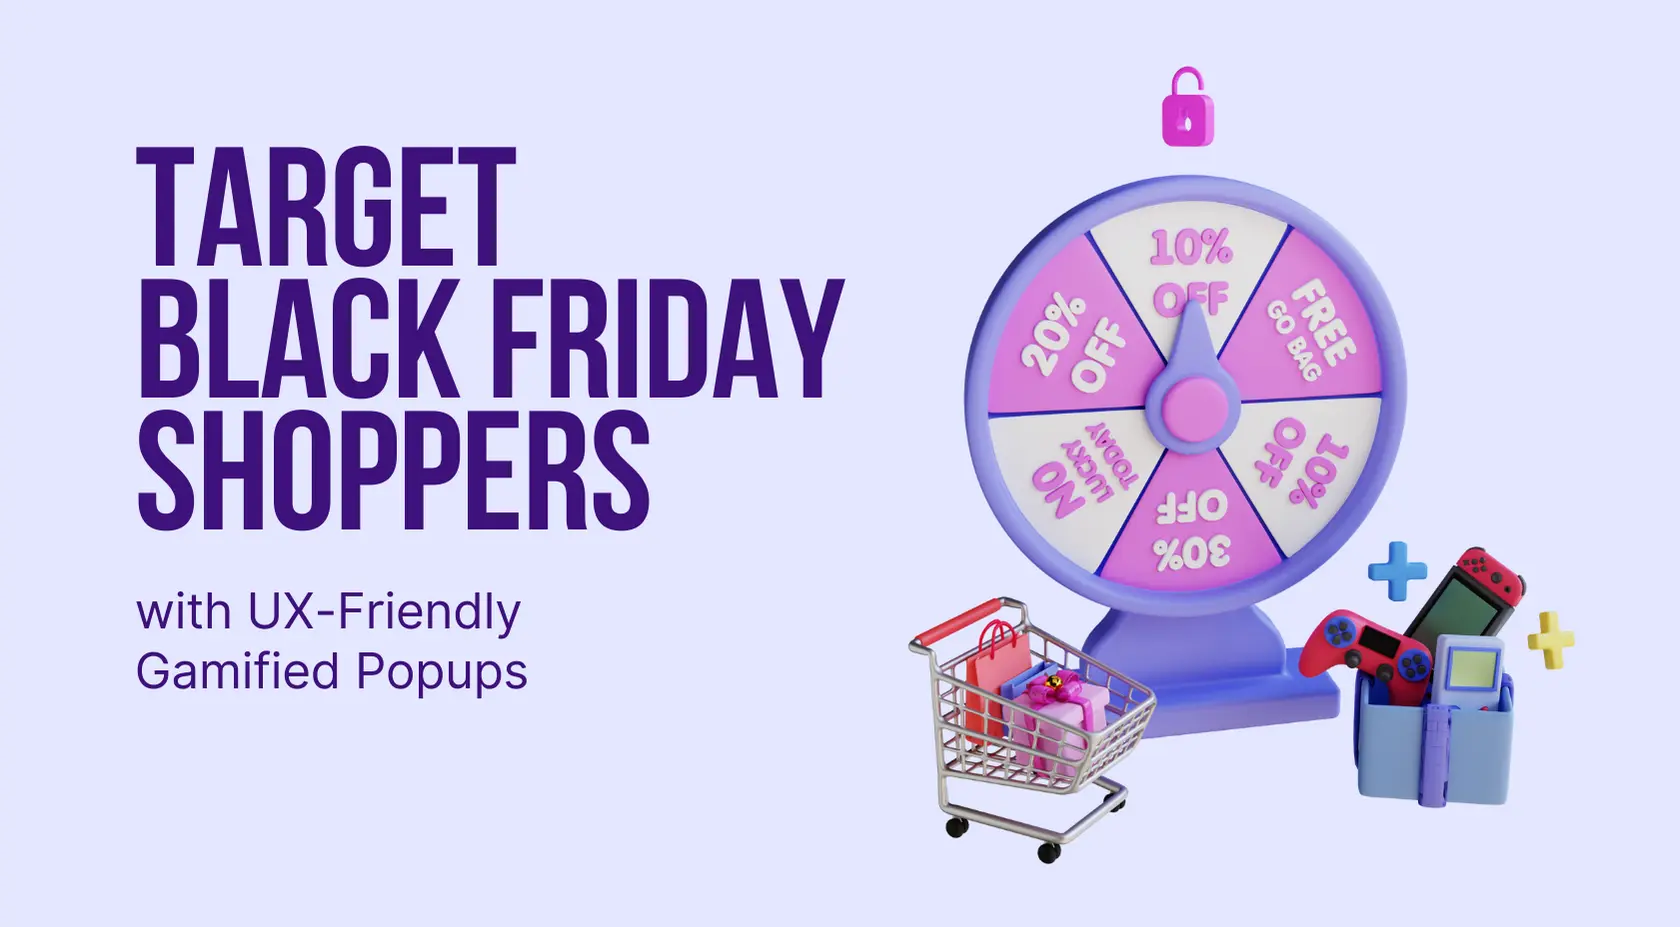 Target Black Friday Shoppers with UX-Friendly Gamified Popups